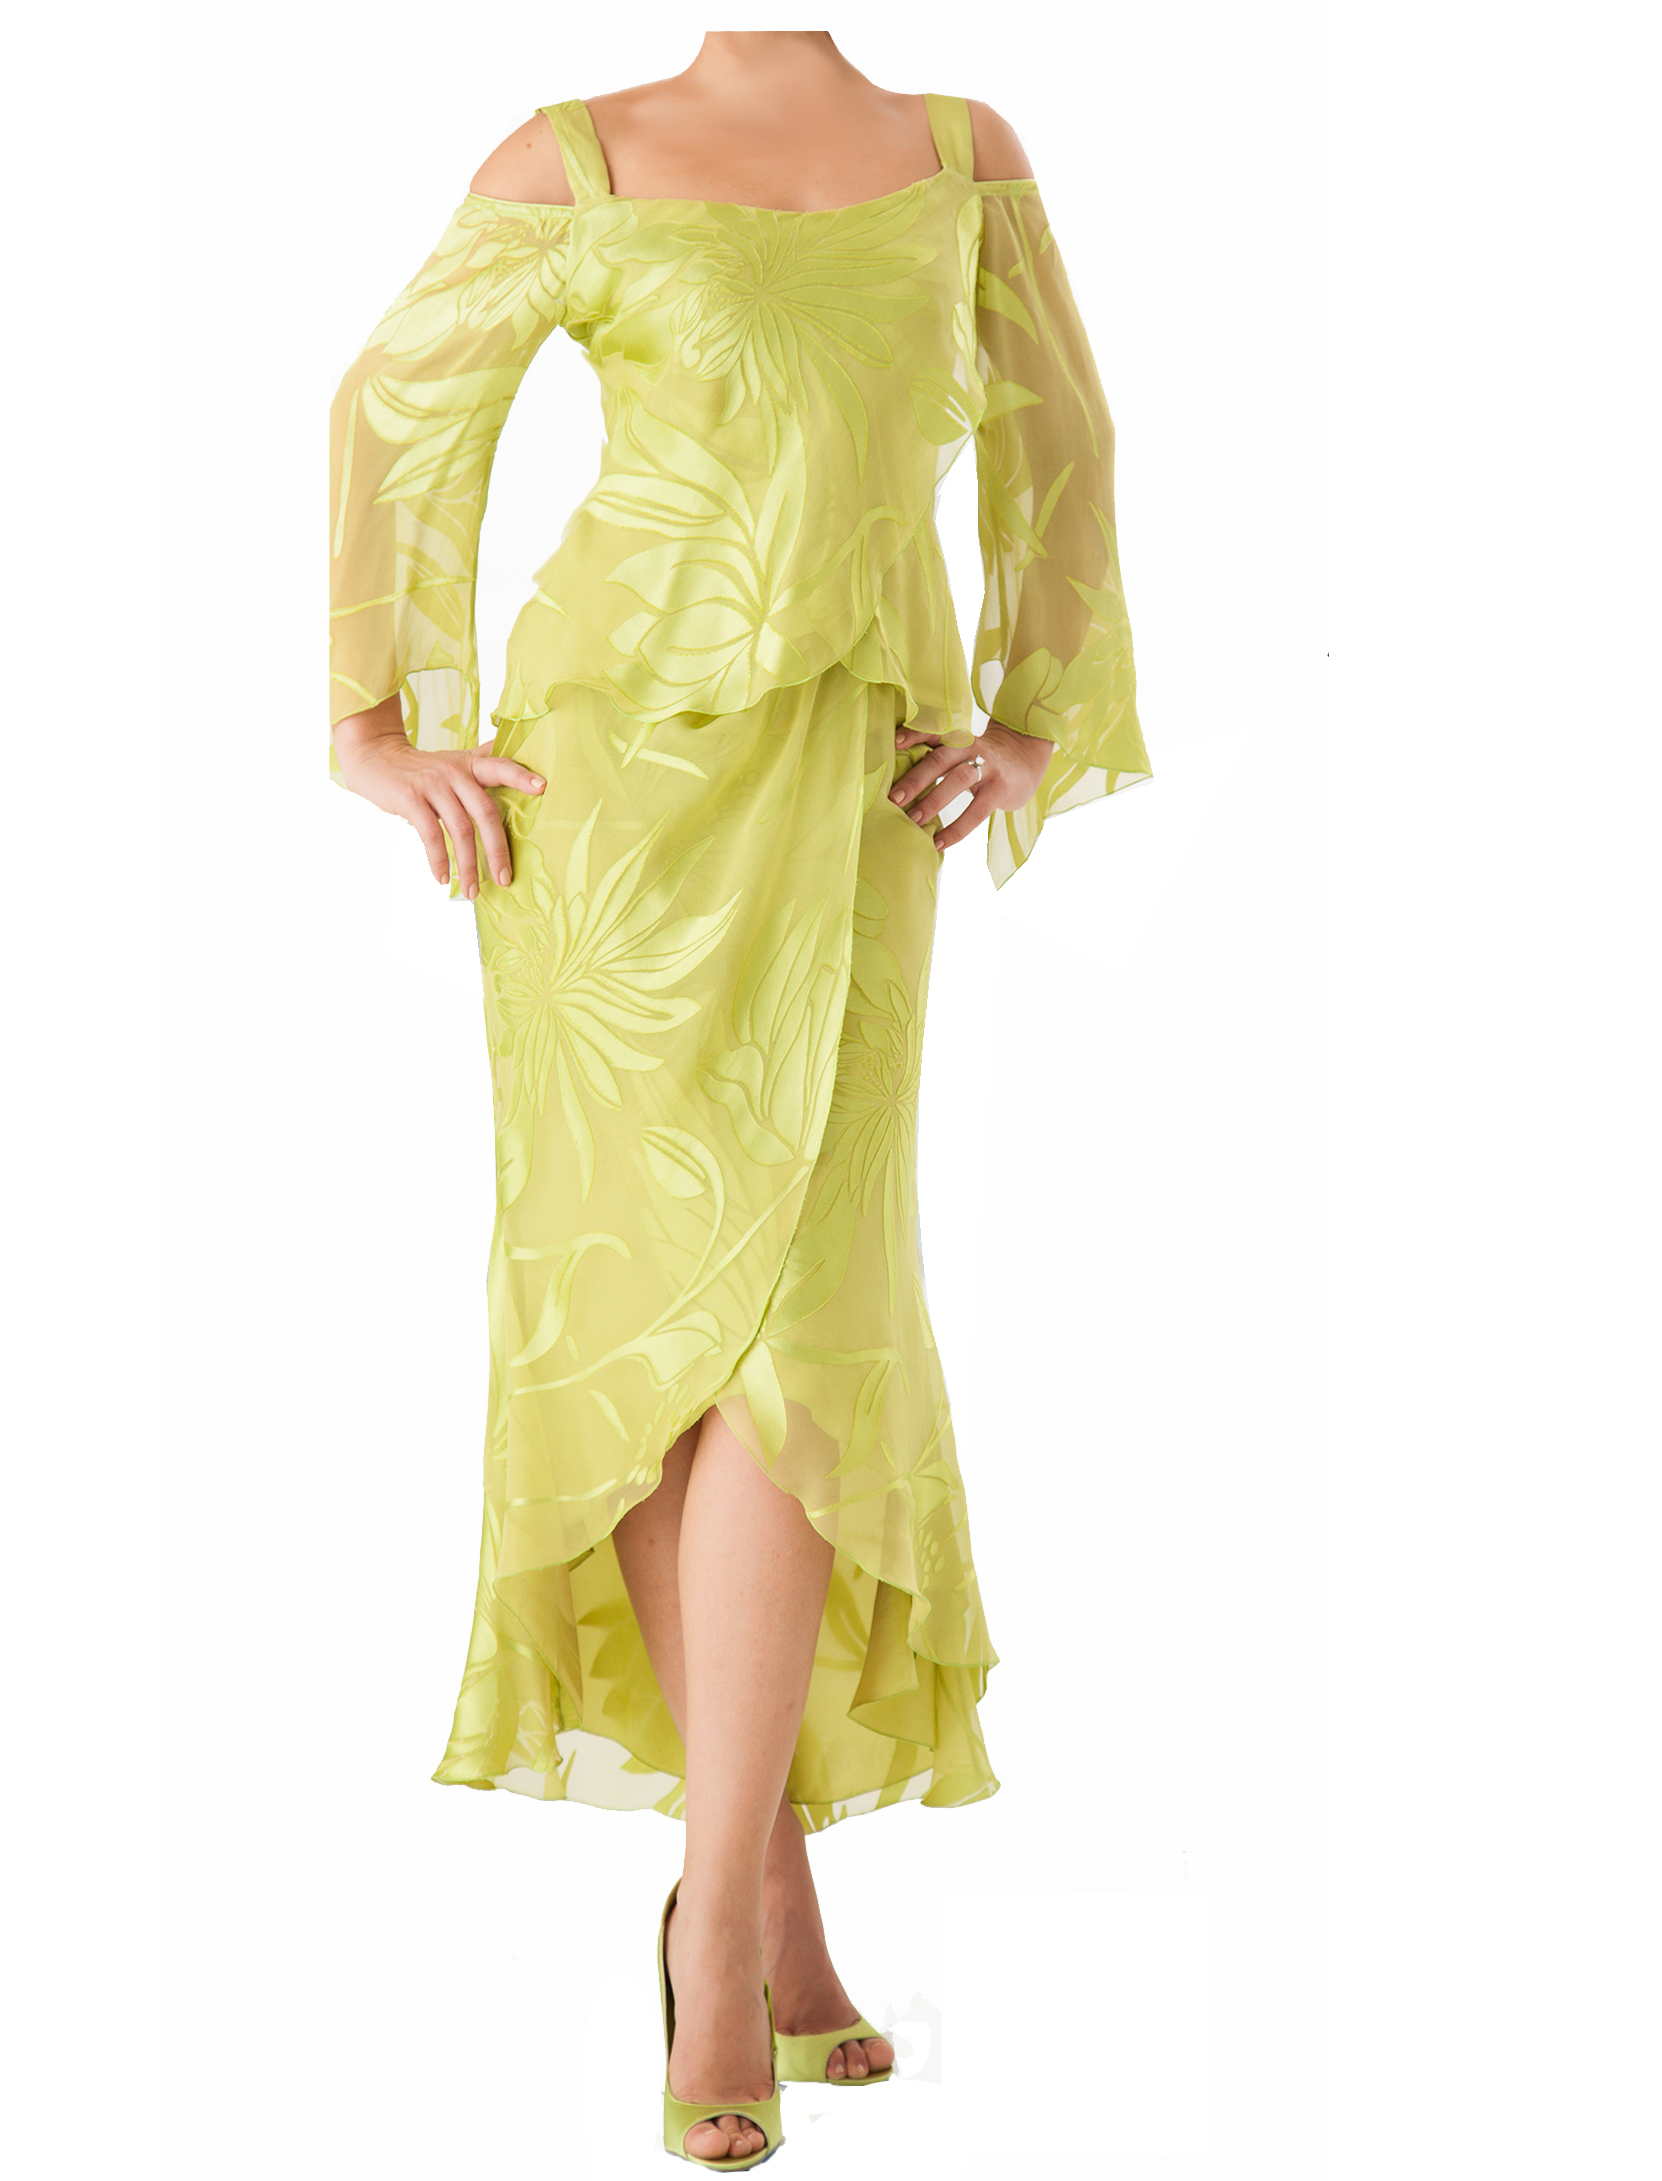 B1830H / S1801H Perfection for Garden or Beach Events - Sara Mique Evening Wear